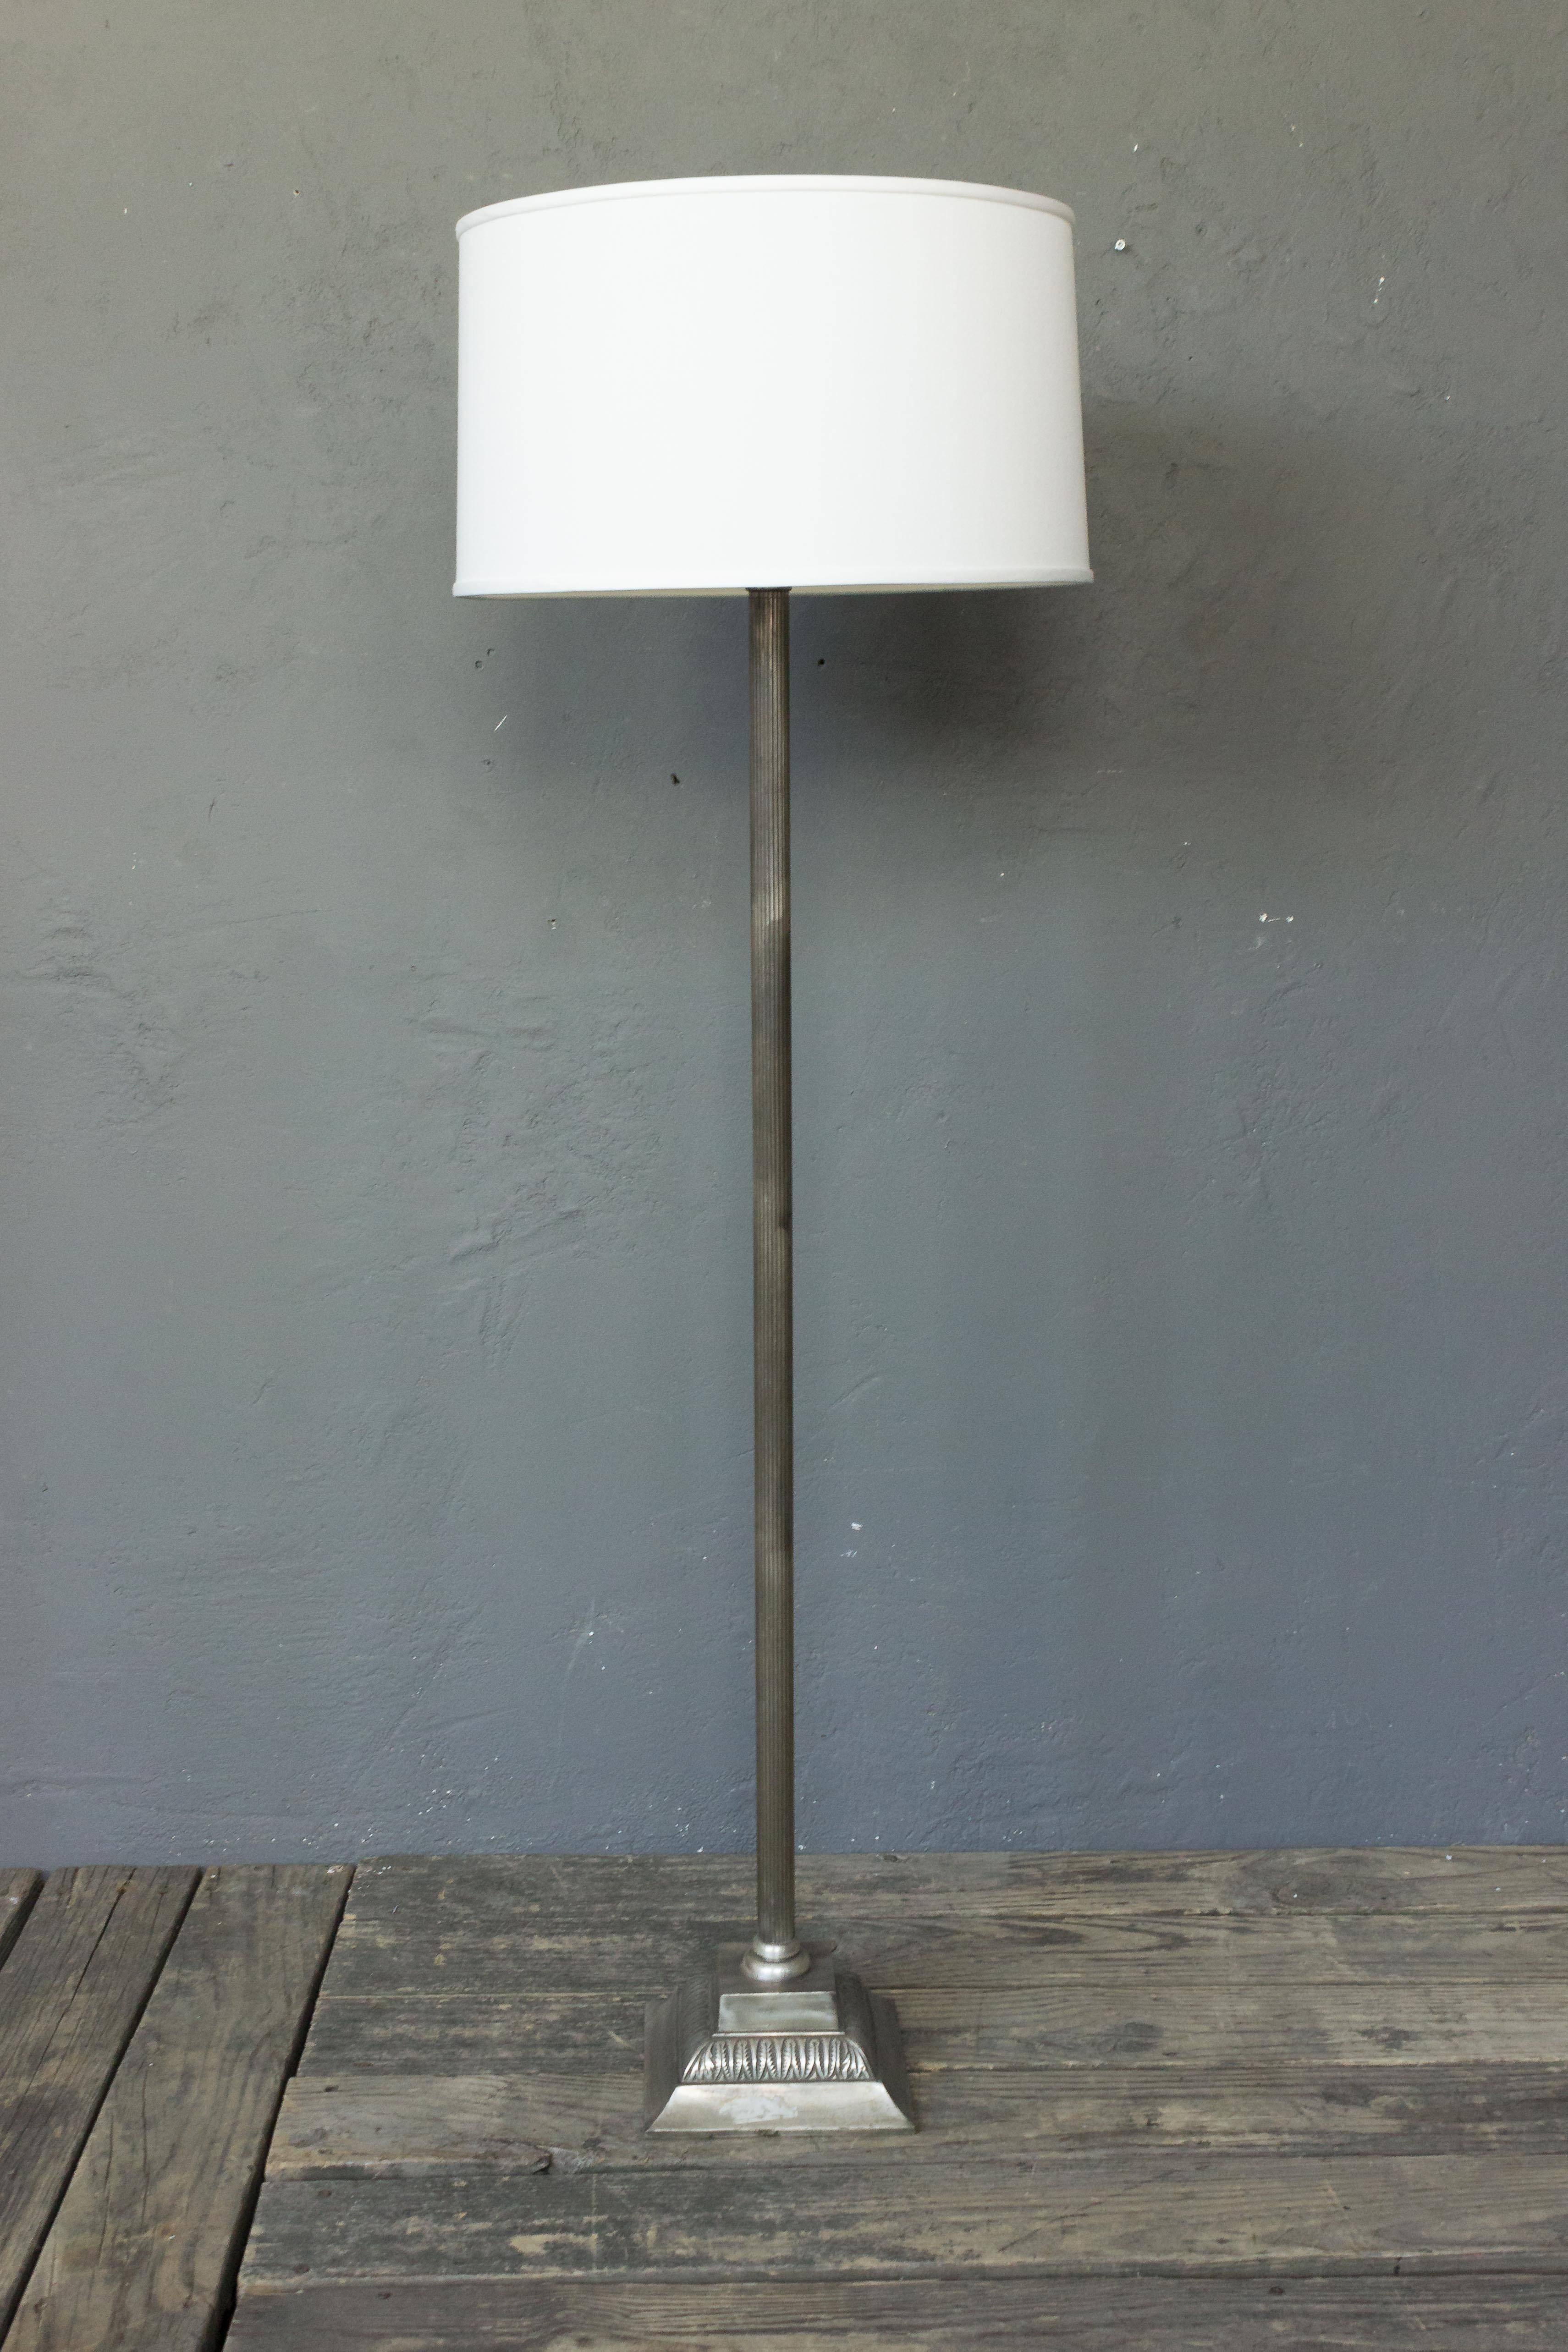 Presenting a French 1940s floor lamp made of silvered bronze and metal, resting on a neoclassical style square base. This remarkable piece is in good vintage condition, with wear consistent with age and use. The price includes hand polishing and new